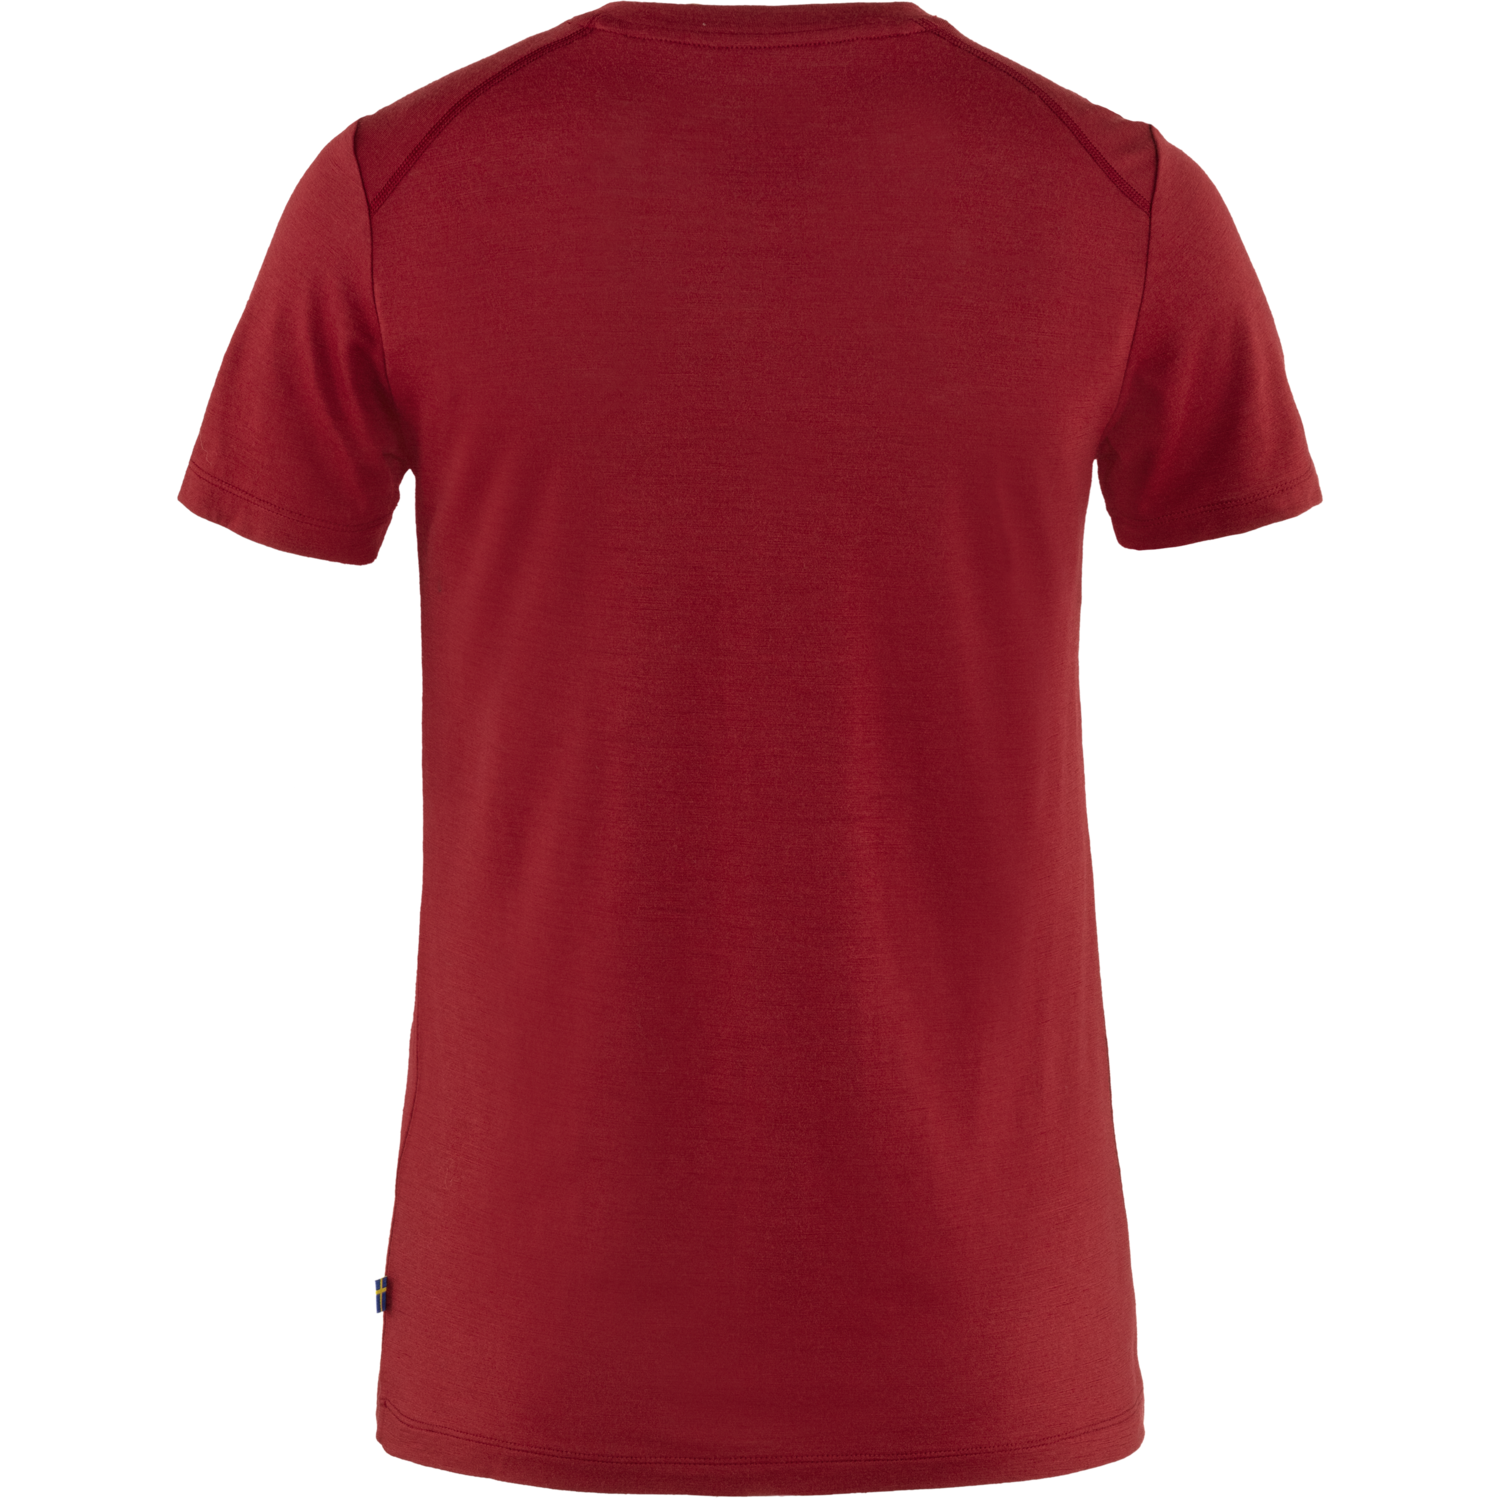 Women red top or t-shirt  for both warm or cold climate.